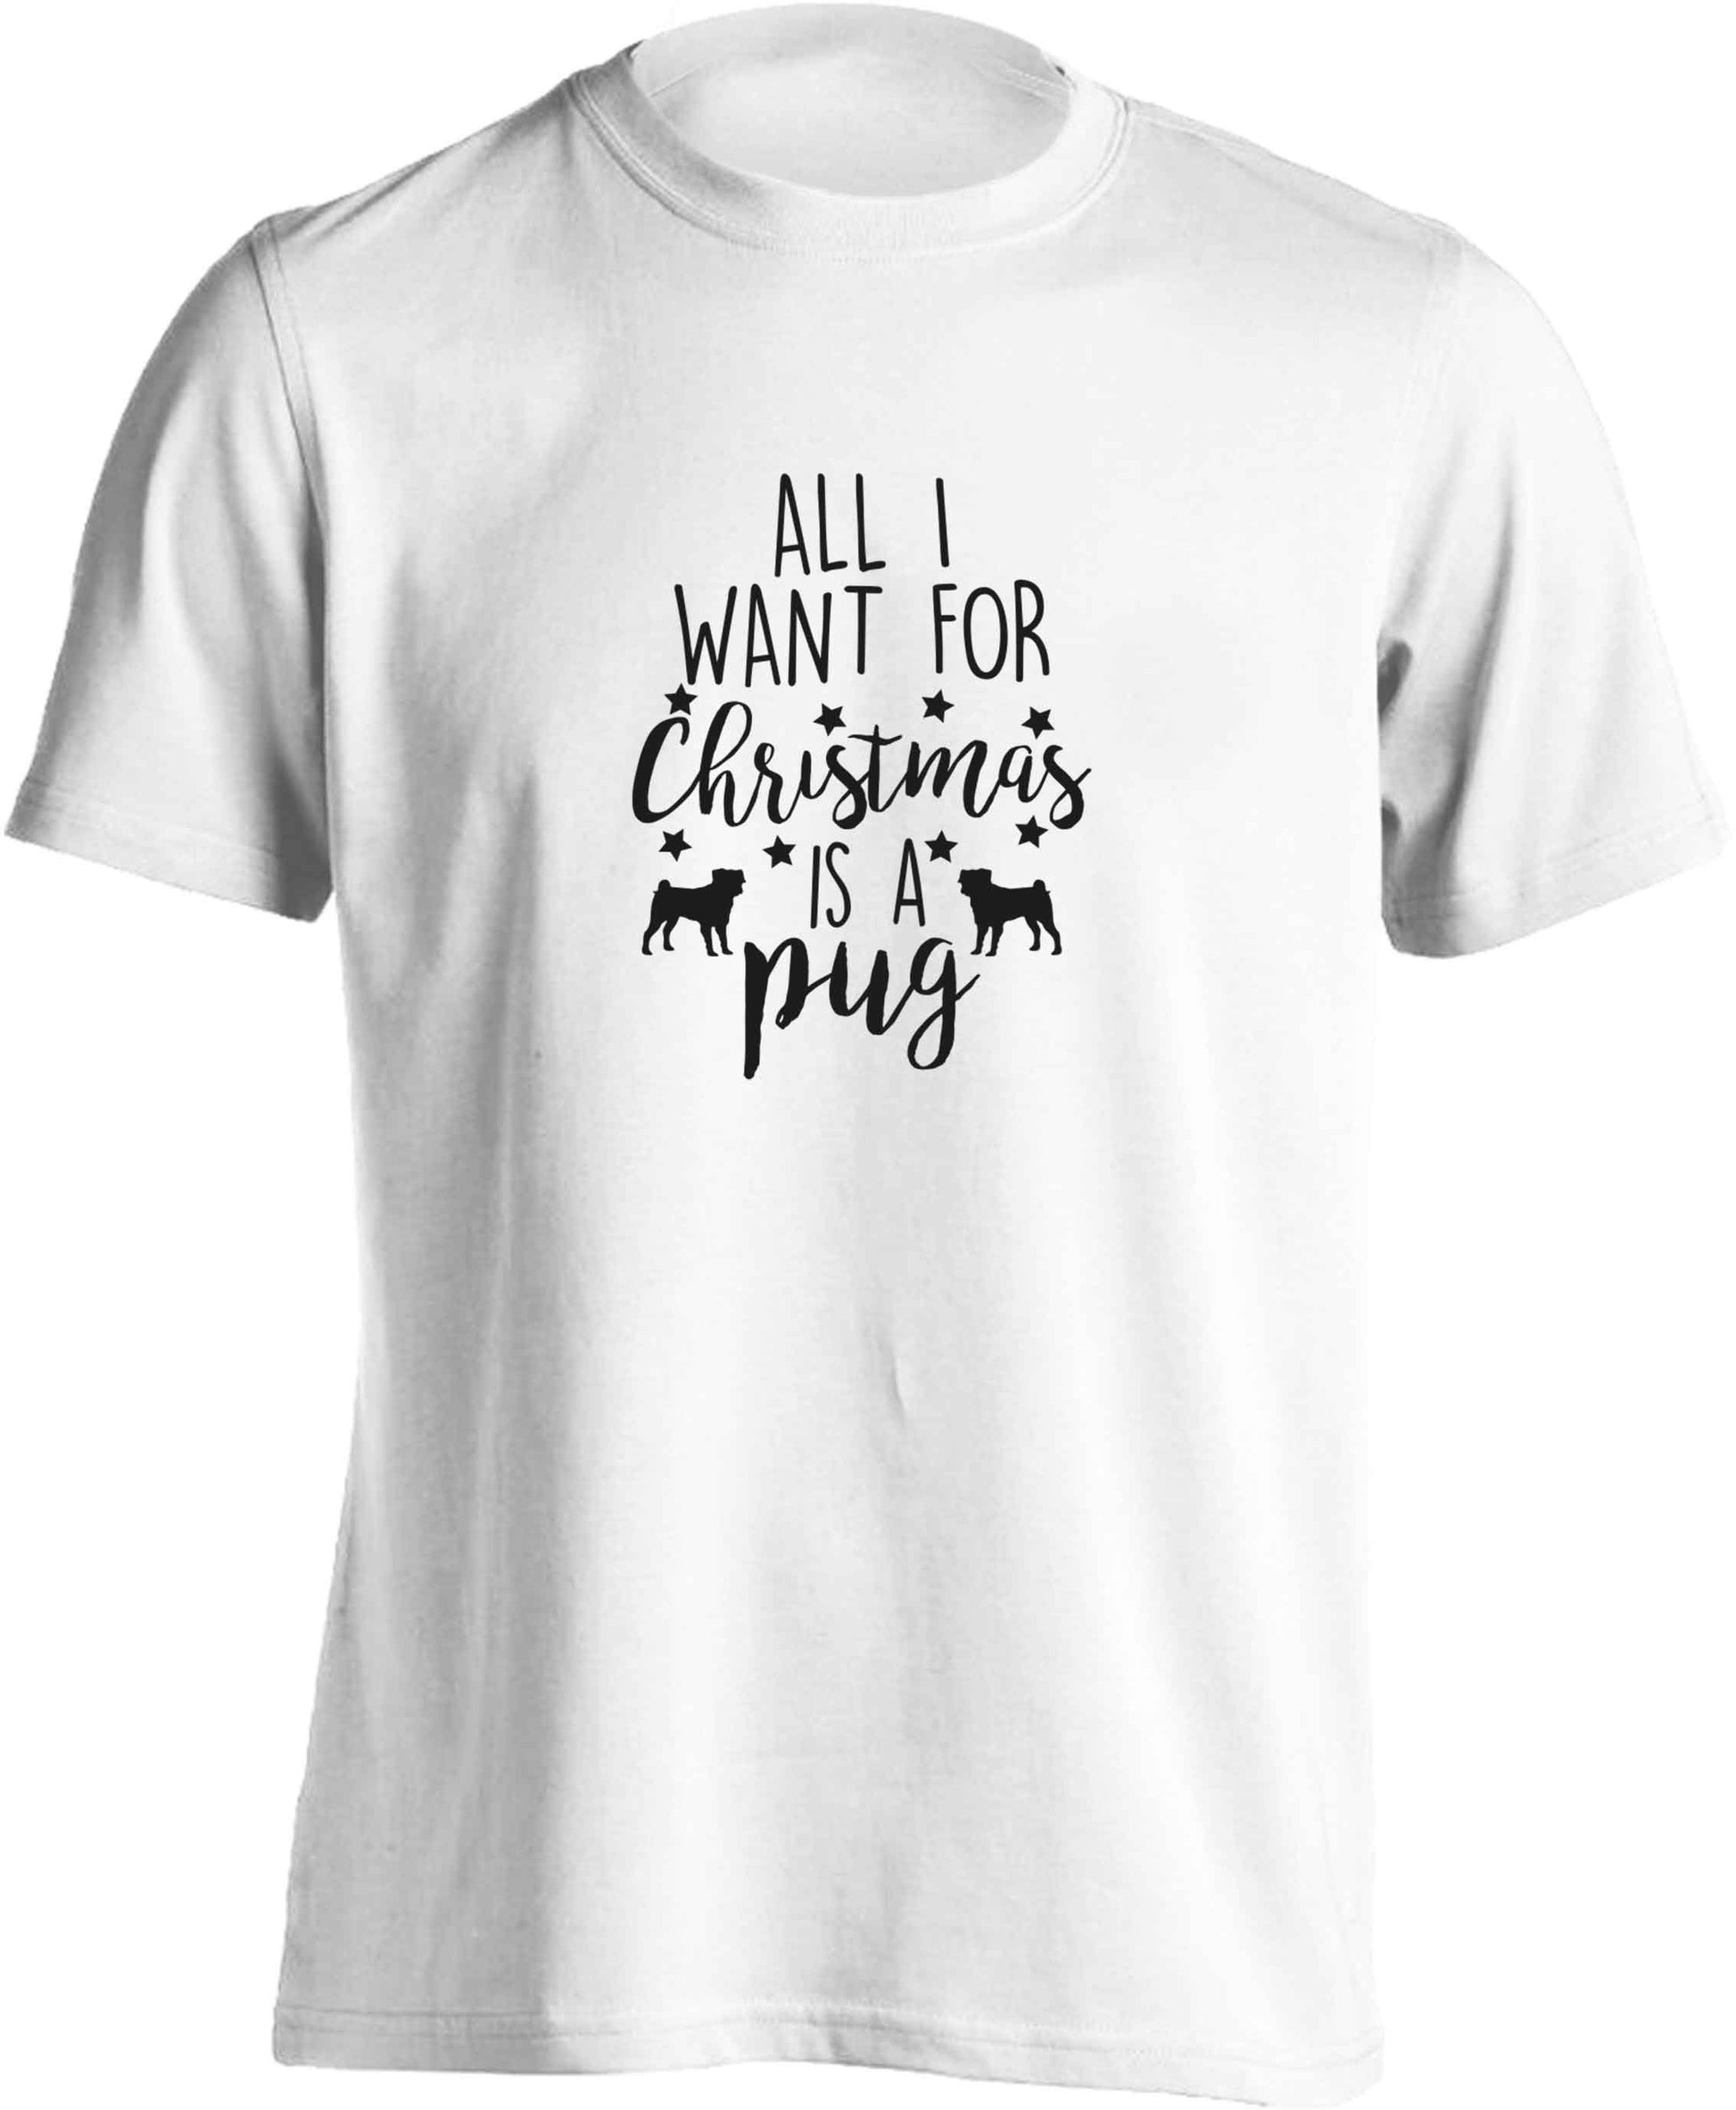 All I want for Christmas is a pug adults unisex white Tshirt 2XL